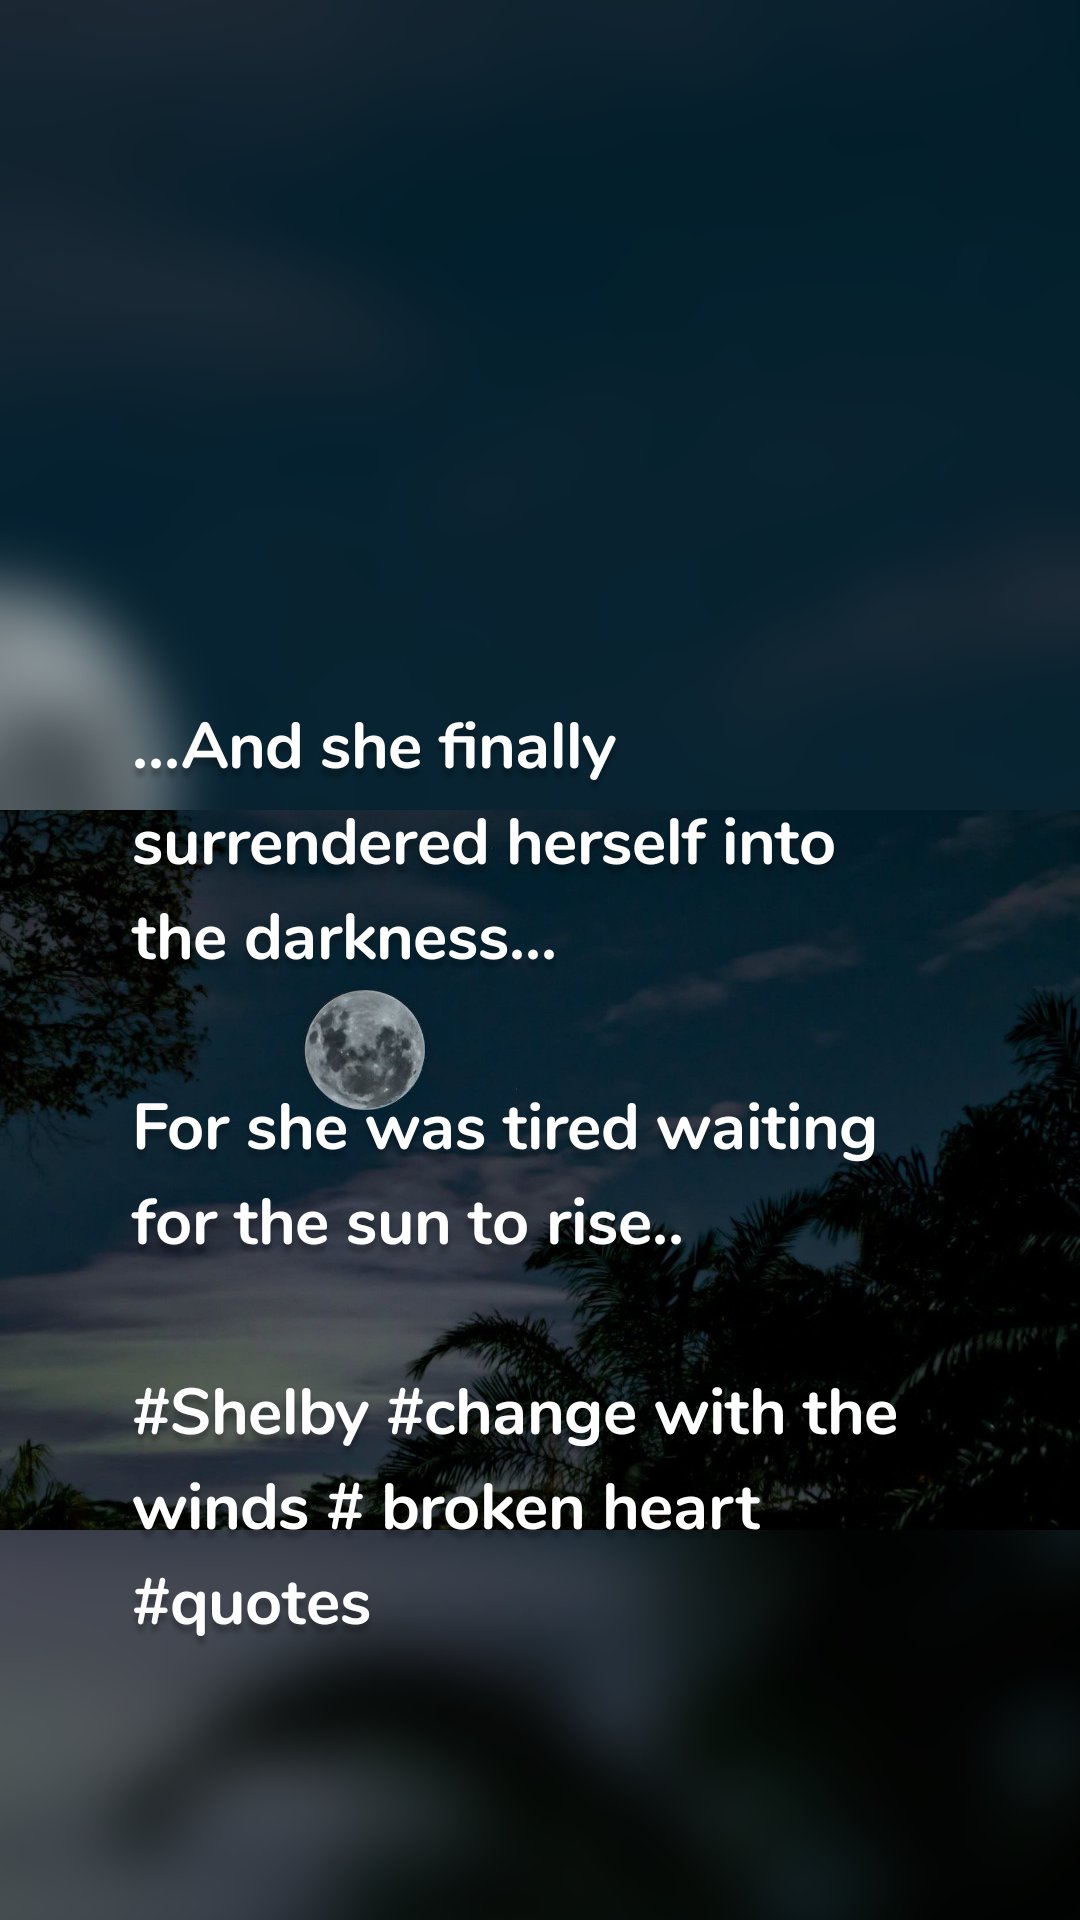 ...And she finally surrendered herself into the darkness...

For she was tired waiting for the sun to rise..

#Shelby #change with the winds # broken heart #quotes 